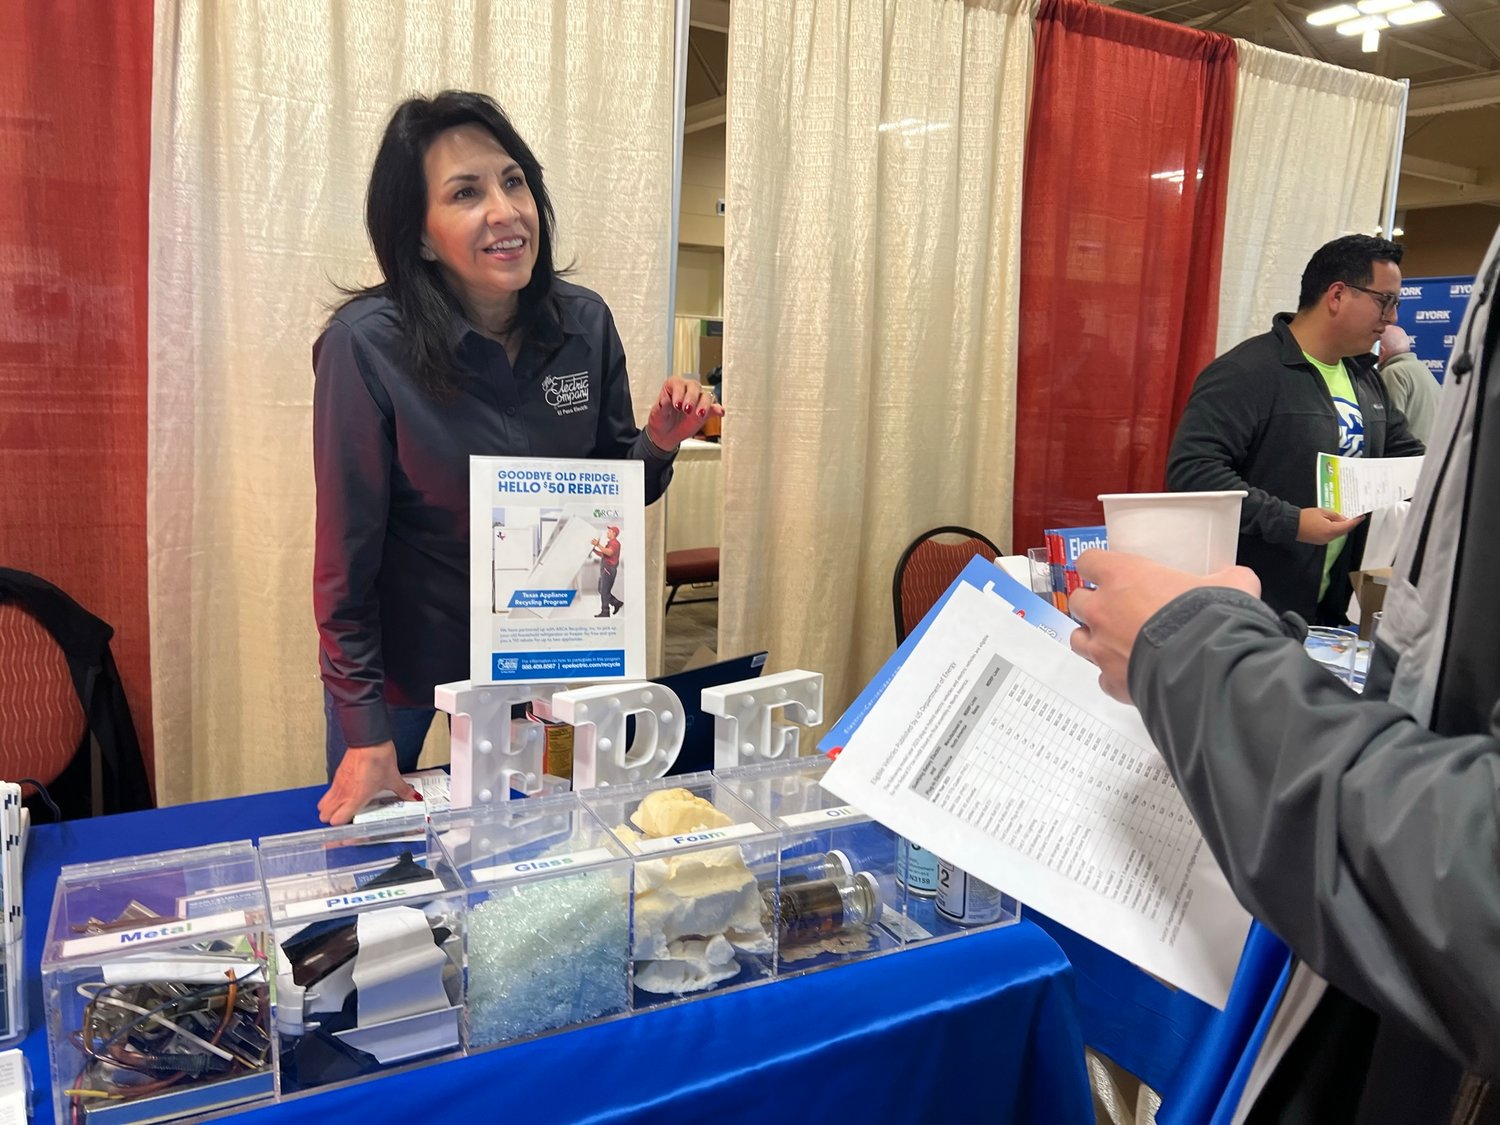 Information on all sorts of electrical power options is available during the PowerUP expo held Friday and Saturday, January 20-21 at the Las Cruces Convention Center. El Paso Electric’s Araceli Perea chats with a visitor to the event.